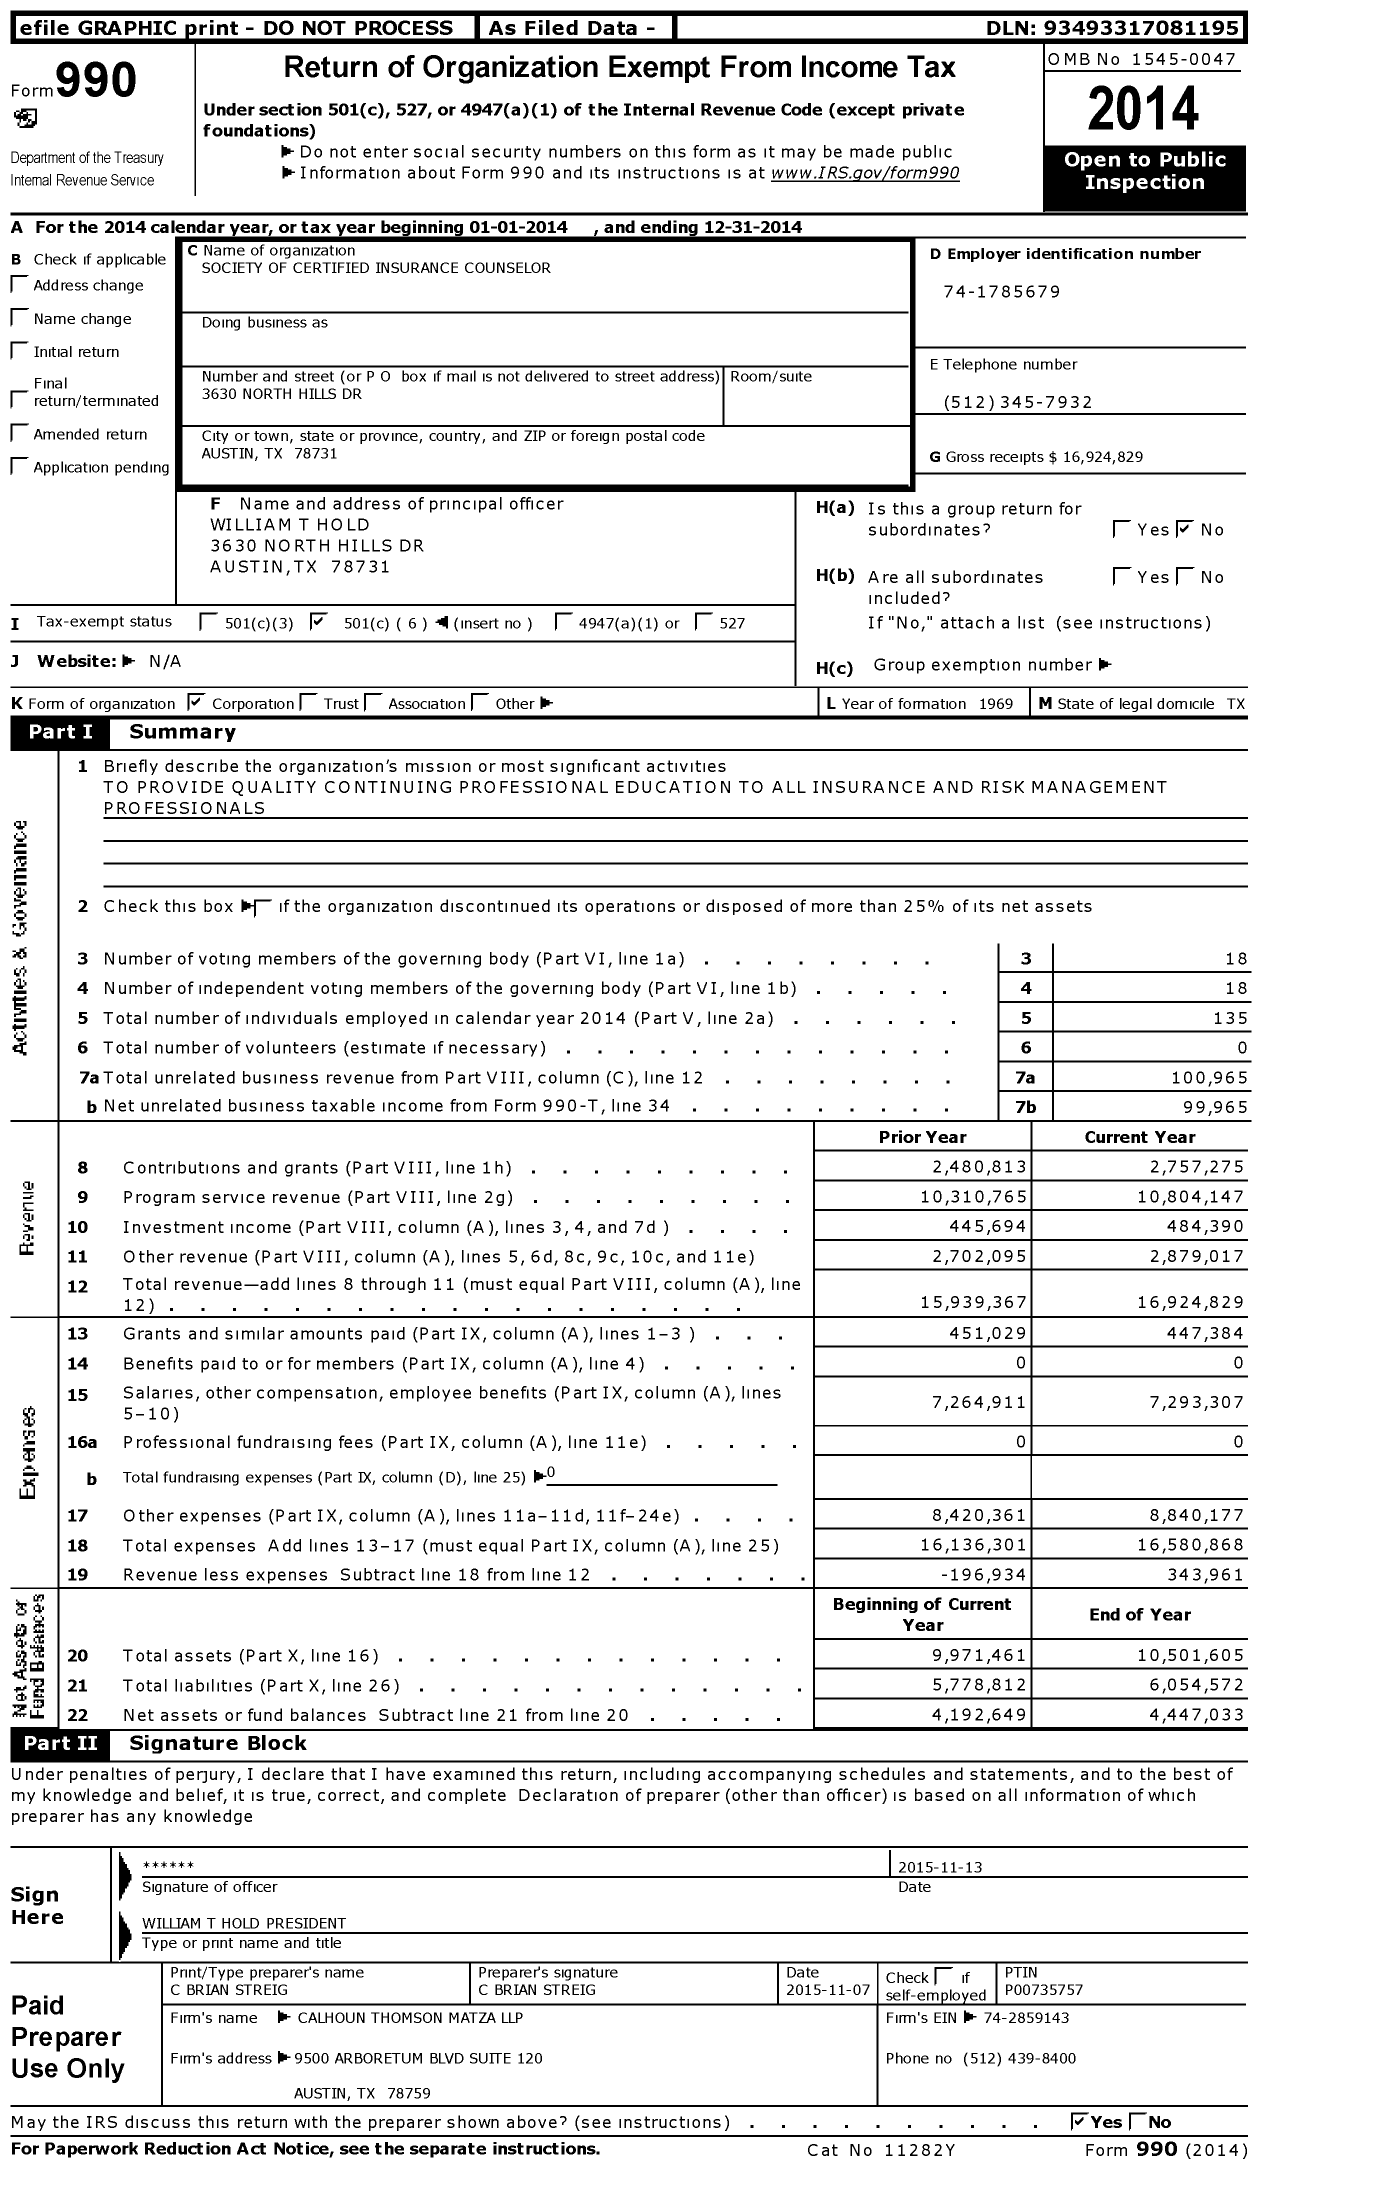 Image of first page of 2014 Form 990O for Society of Certified Insurance Counselor